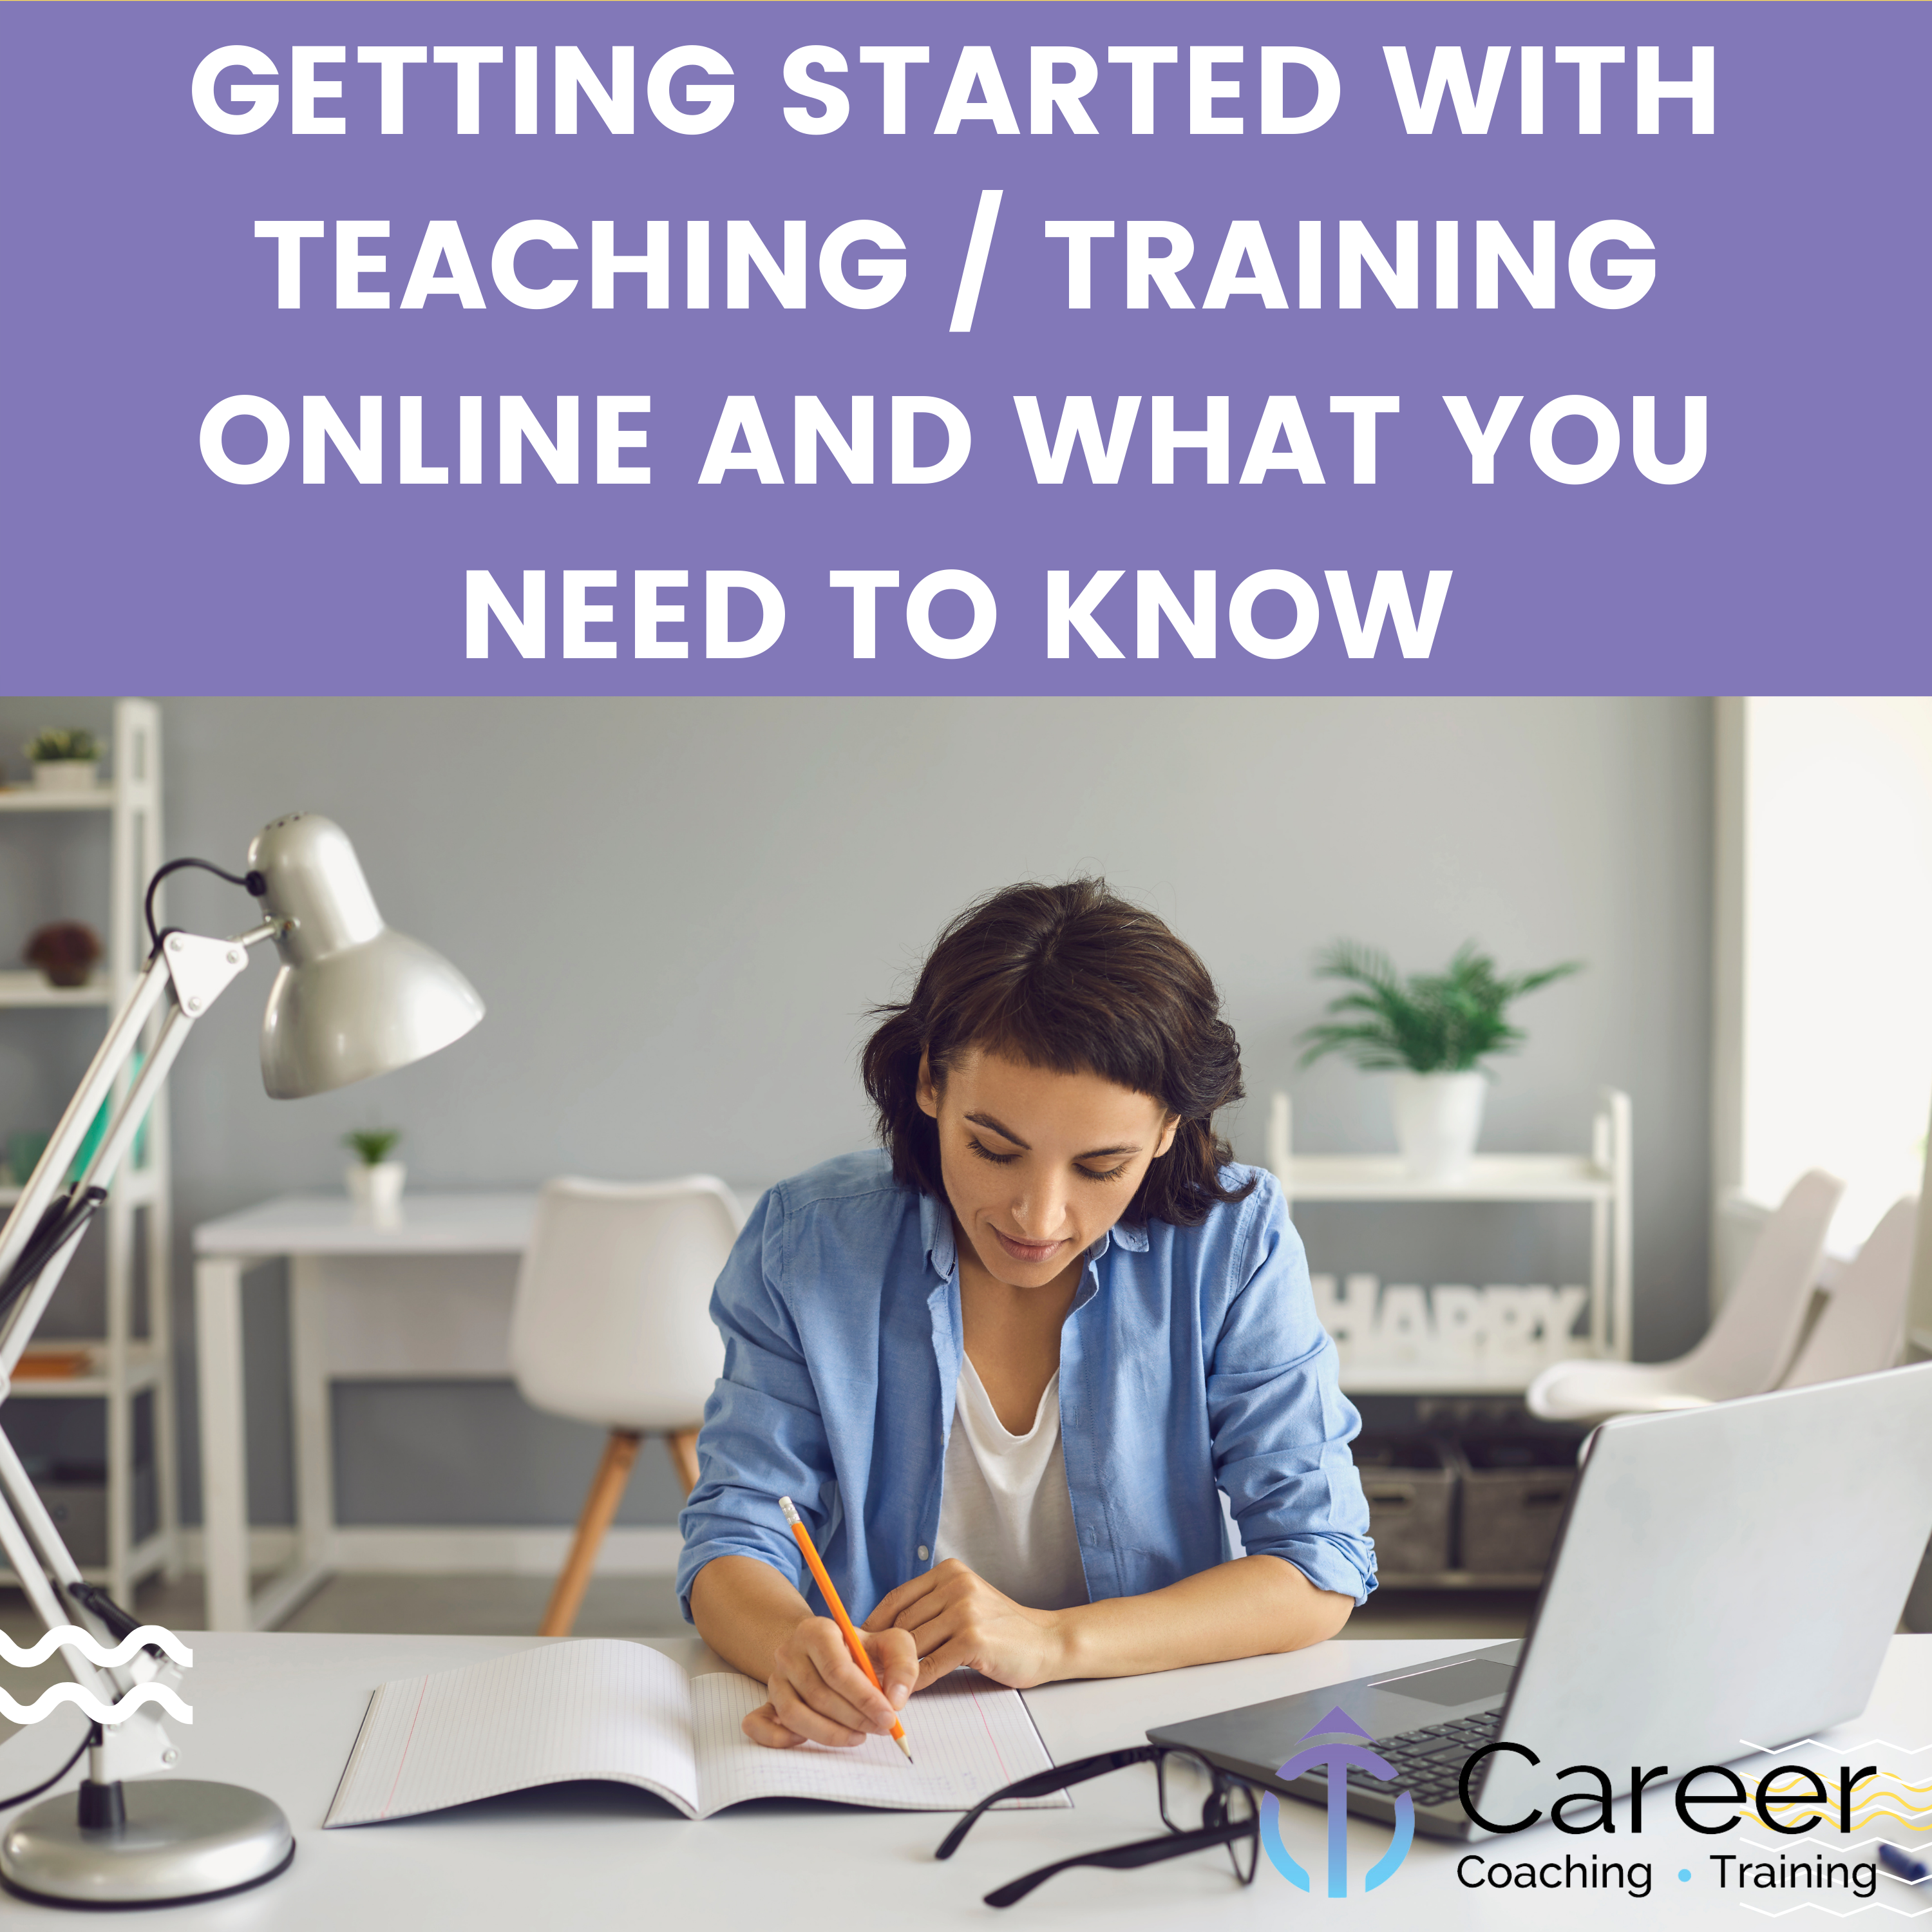 Getting Started with Online Teaching and What You Need to Know